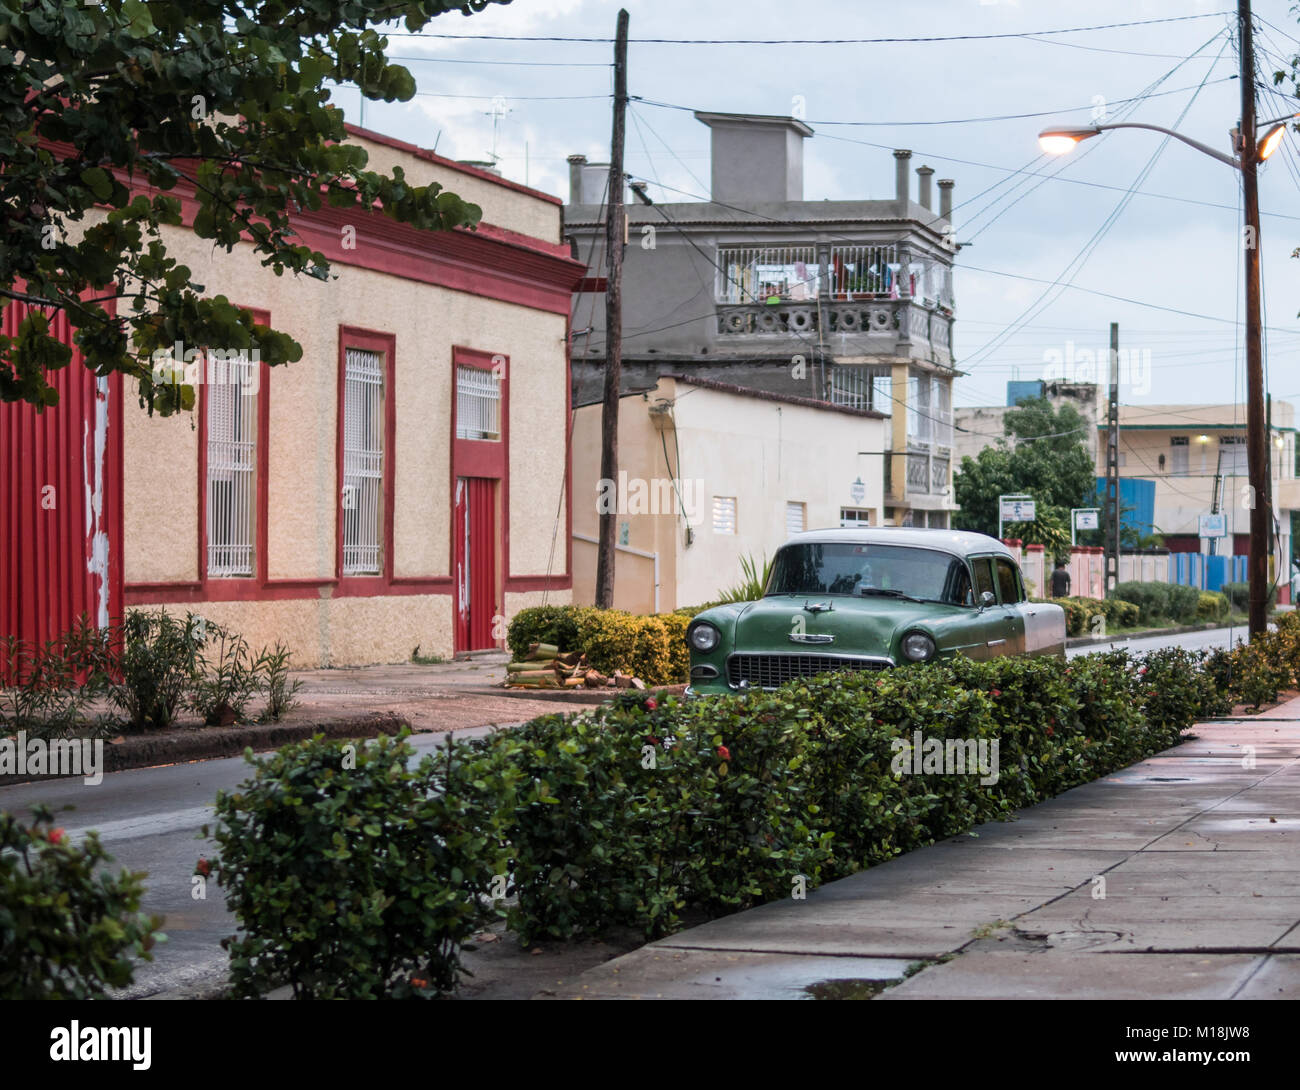 Holguin, Cuba - August 31, 2017: Retro American classic car parked on the side street. Stock Photo